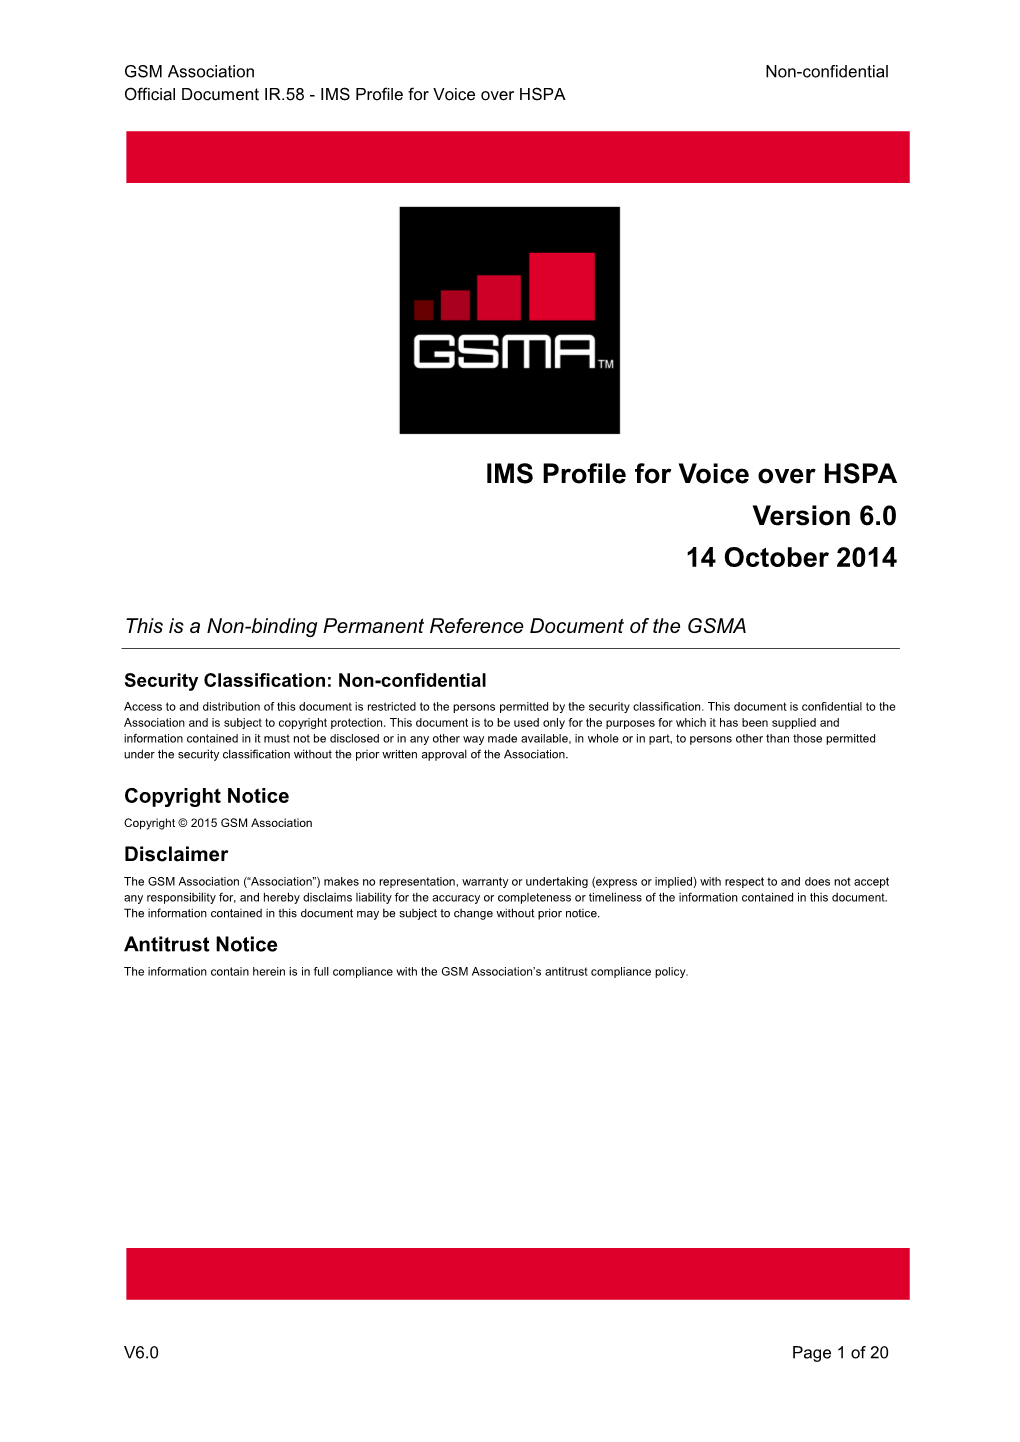 IMS Profile for Voice Over HSPA Version 6.0 14 October 2014